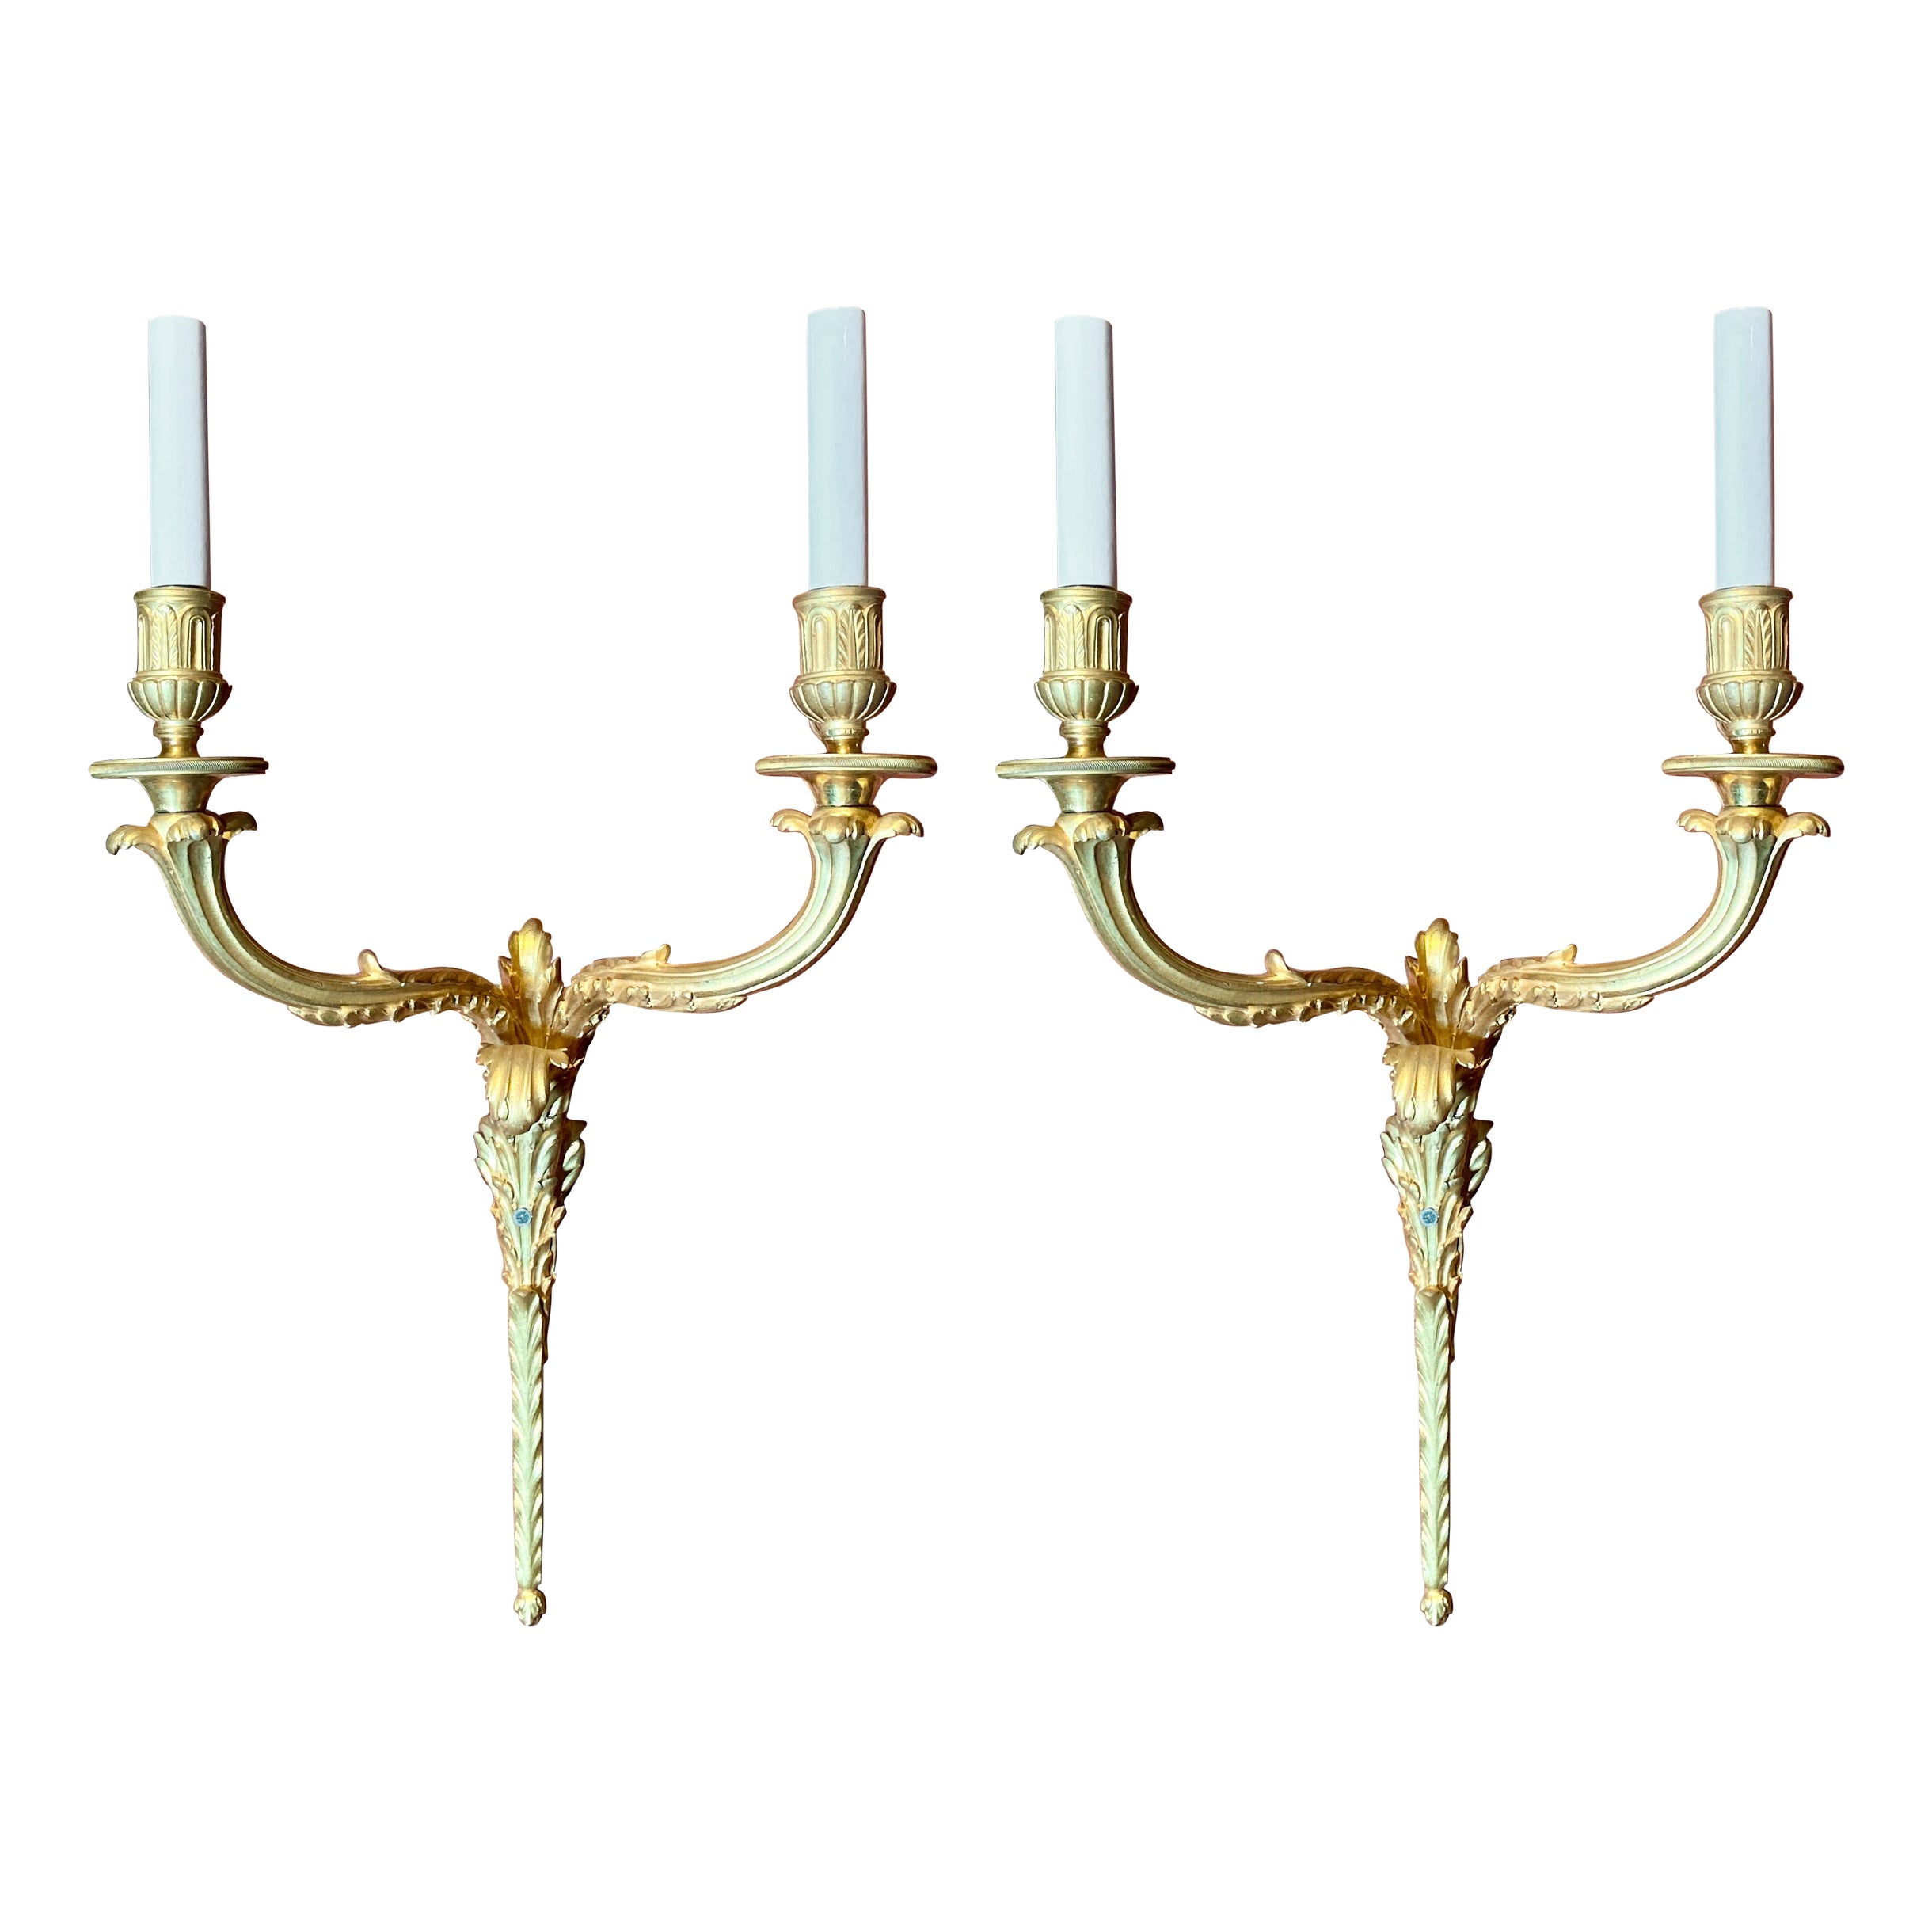 Pair Antique French Bronze D' Ore Wall Sconces, Circa 1880s For Sale